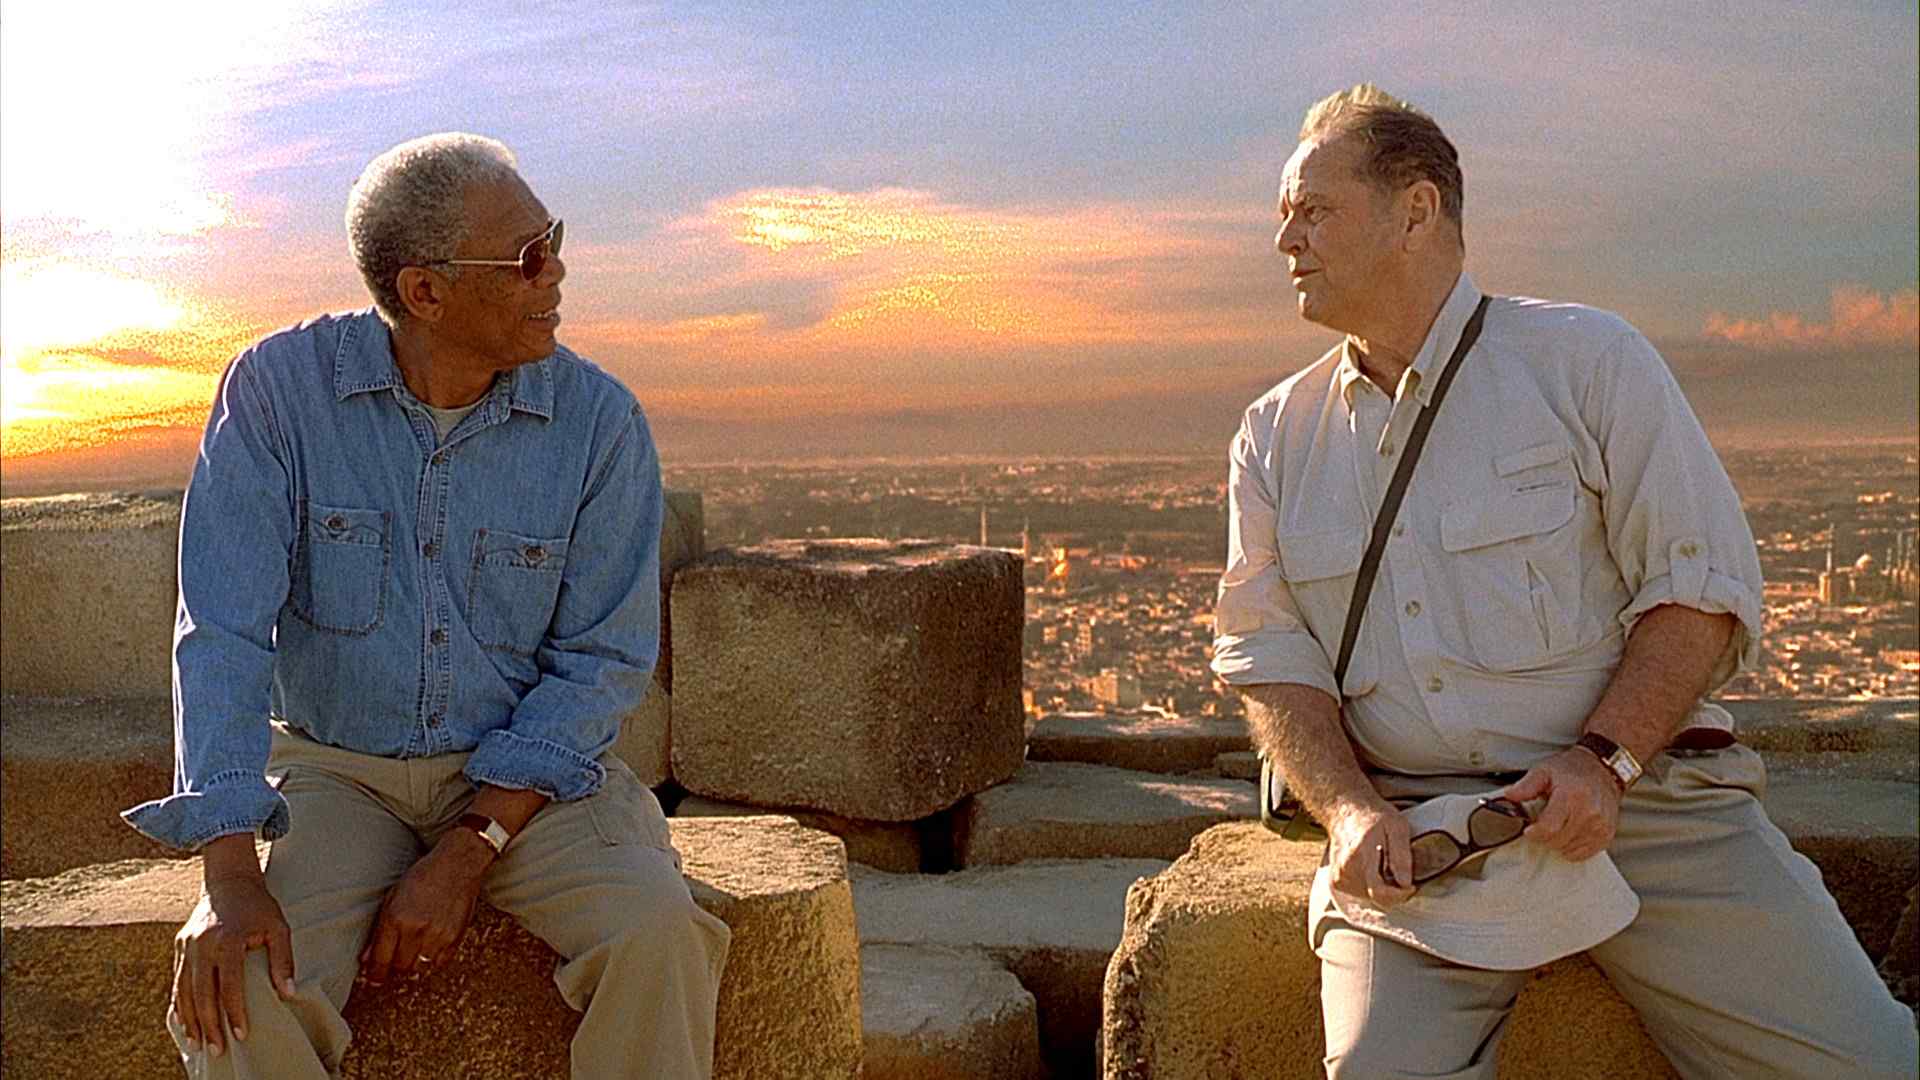 JACK NICHOLSON stars as Edward and MORGAN FREEMAN stars as Carter in Warner Bros. Pictures’ comedy drama “The Bucket List.” PHOTOGRAPHS TO BE USED SOLELY FOR ADVERTISING, PROMOTION, PUBLICITY OR REVIEWS OF THIS SPECIFIC MOTION PICTURE AND TO REMAIN THE PROPERTY OF THE STUDIO. NOT FOR SALE OR REDISTRIBUTION.